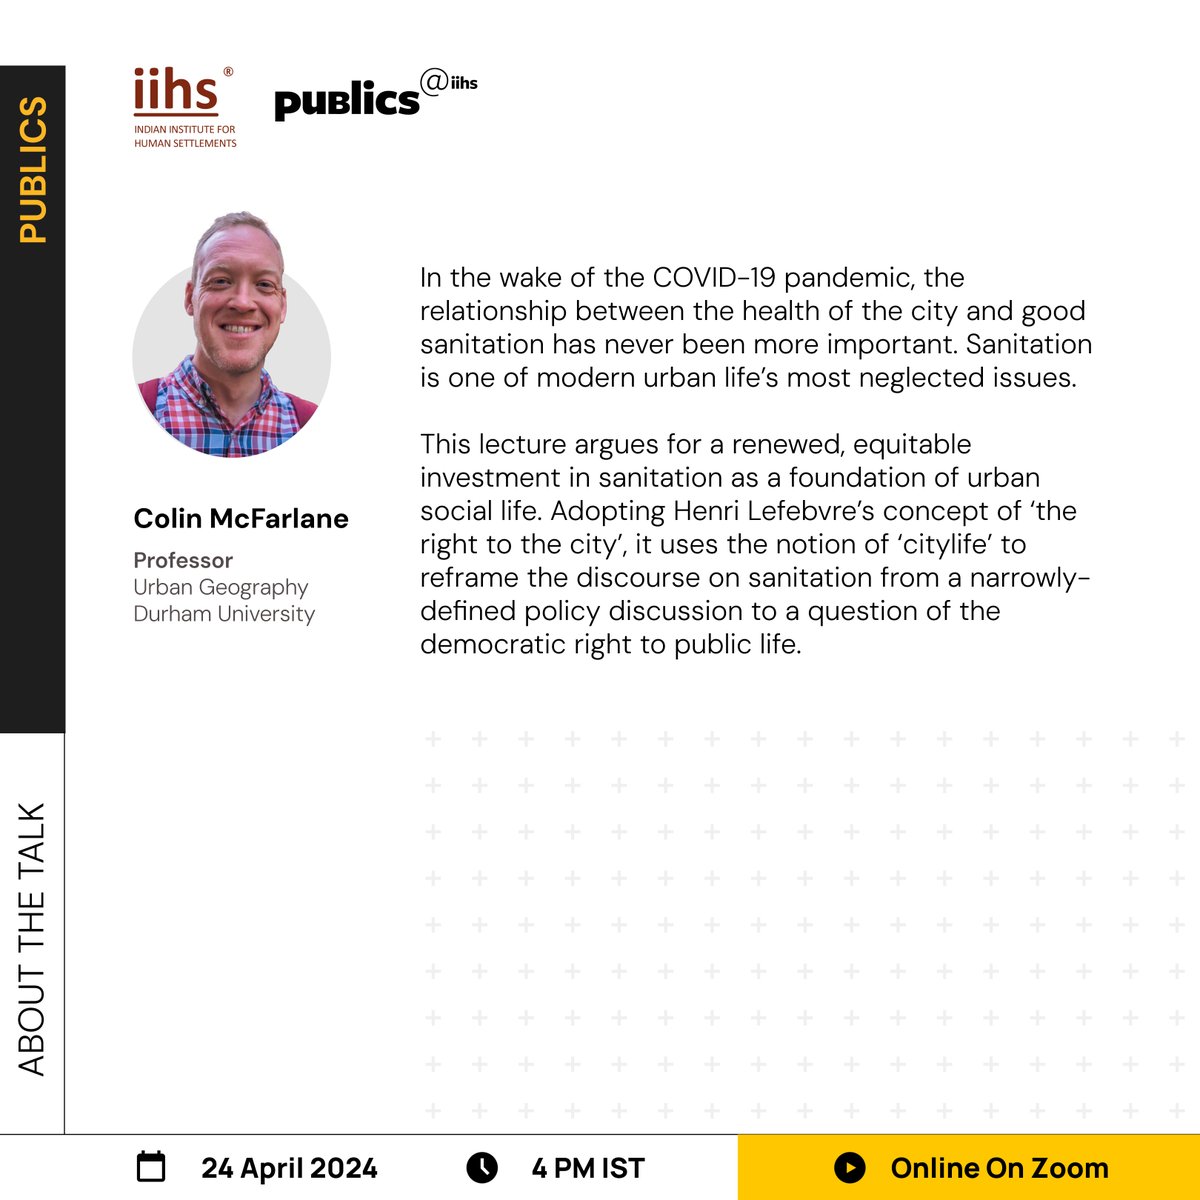 Join us for a Publics@IIHS lecture with @ColinMcFarlane3, on 24 April, 4pm IST. He uses the notion of ‘citylife’ to change the discourse on sanitation from a narrowly-defined policy discussion to a question of the democratic right to public life. Register: bit.ly/4aJr0fo